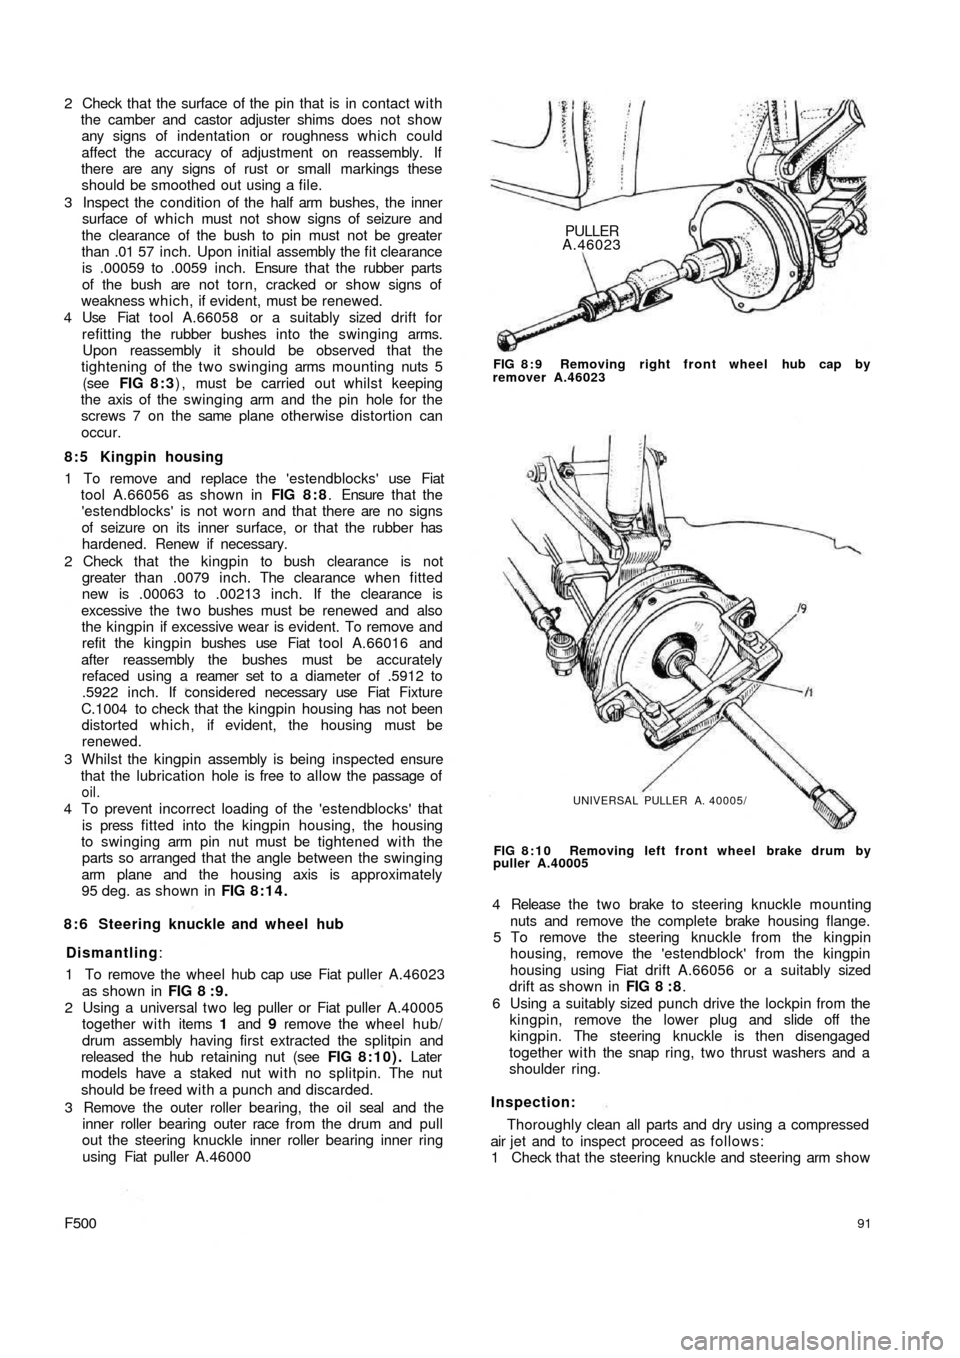 FIAT 500 1968 1.G Workshop Manual 2  Check that the surface of the pin that is in contact with
the camber and castor adjuster shims does not show
any signs of indentation or roughness which could
affect the  accuracy of adjustment on 